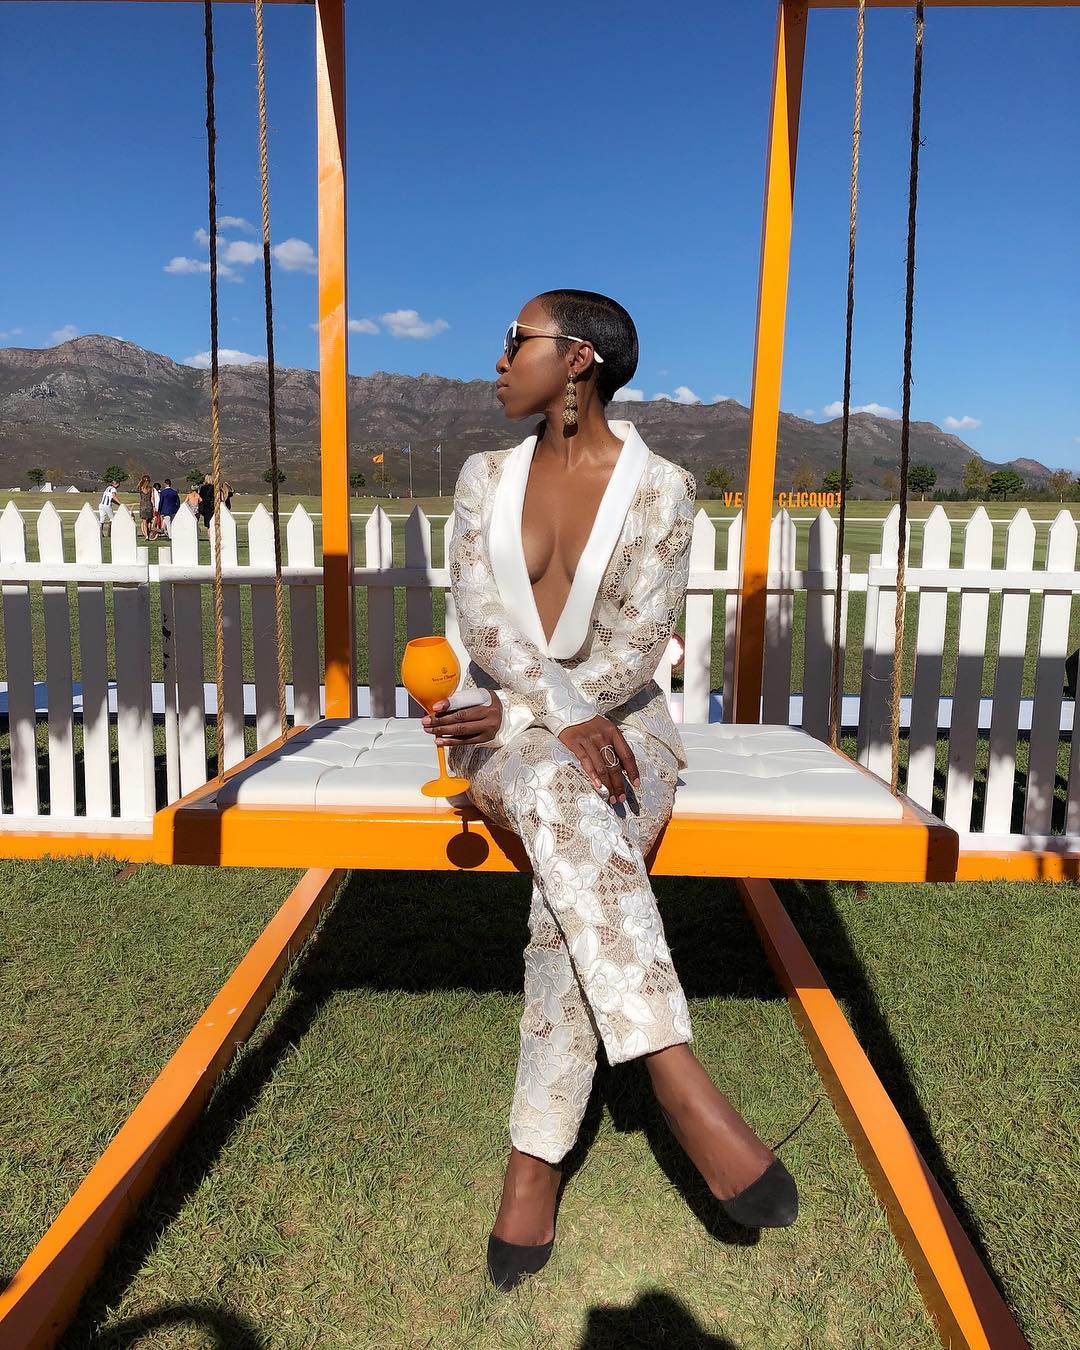 the-looks-that-stole-the-spotlight-at-the-2018-veuve-clicquot-masters-polo-in-cape-town